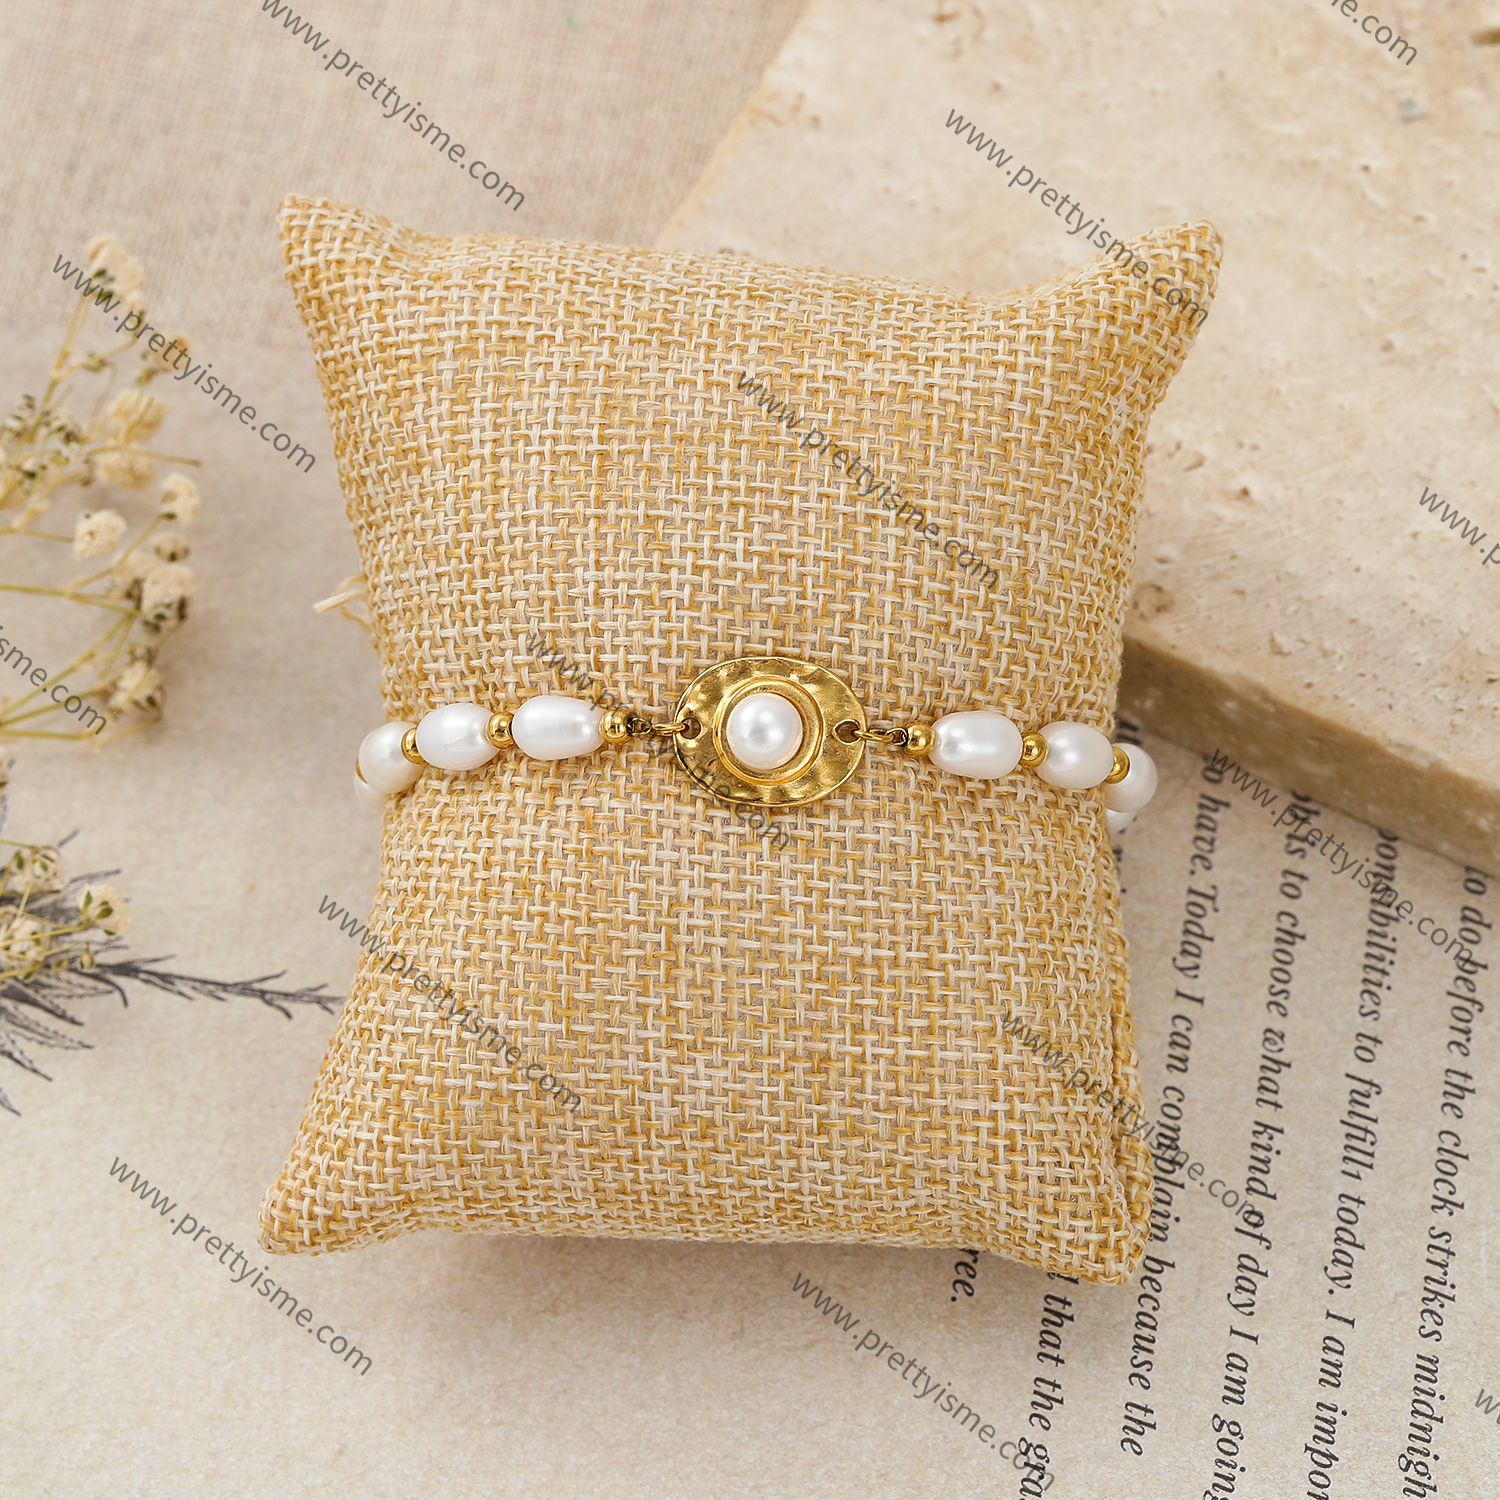 Pearl Bracelet Gold Plated 18K Gentle Delicate Bracelet with Small Gold Beads.webp